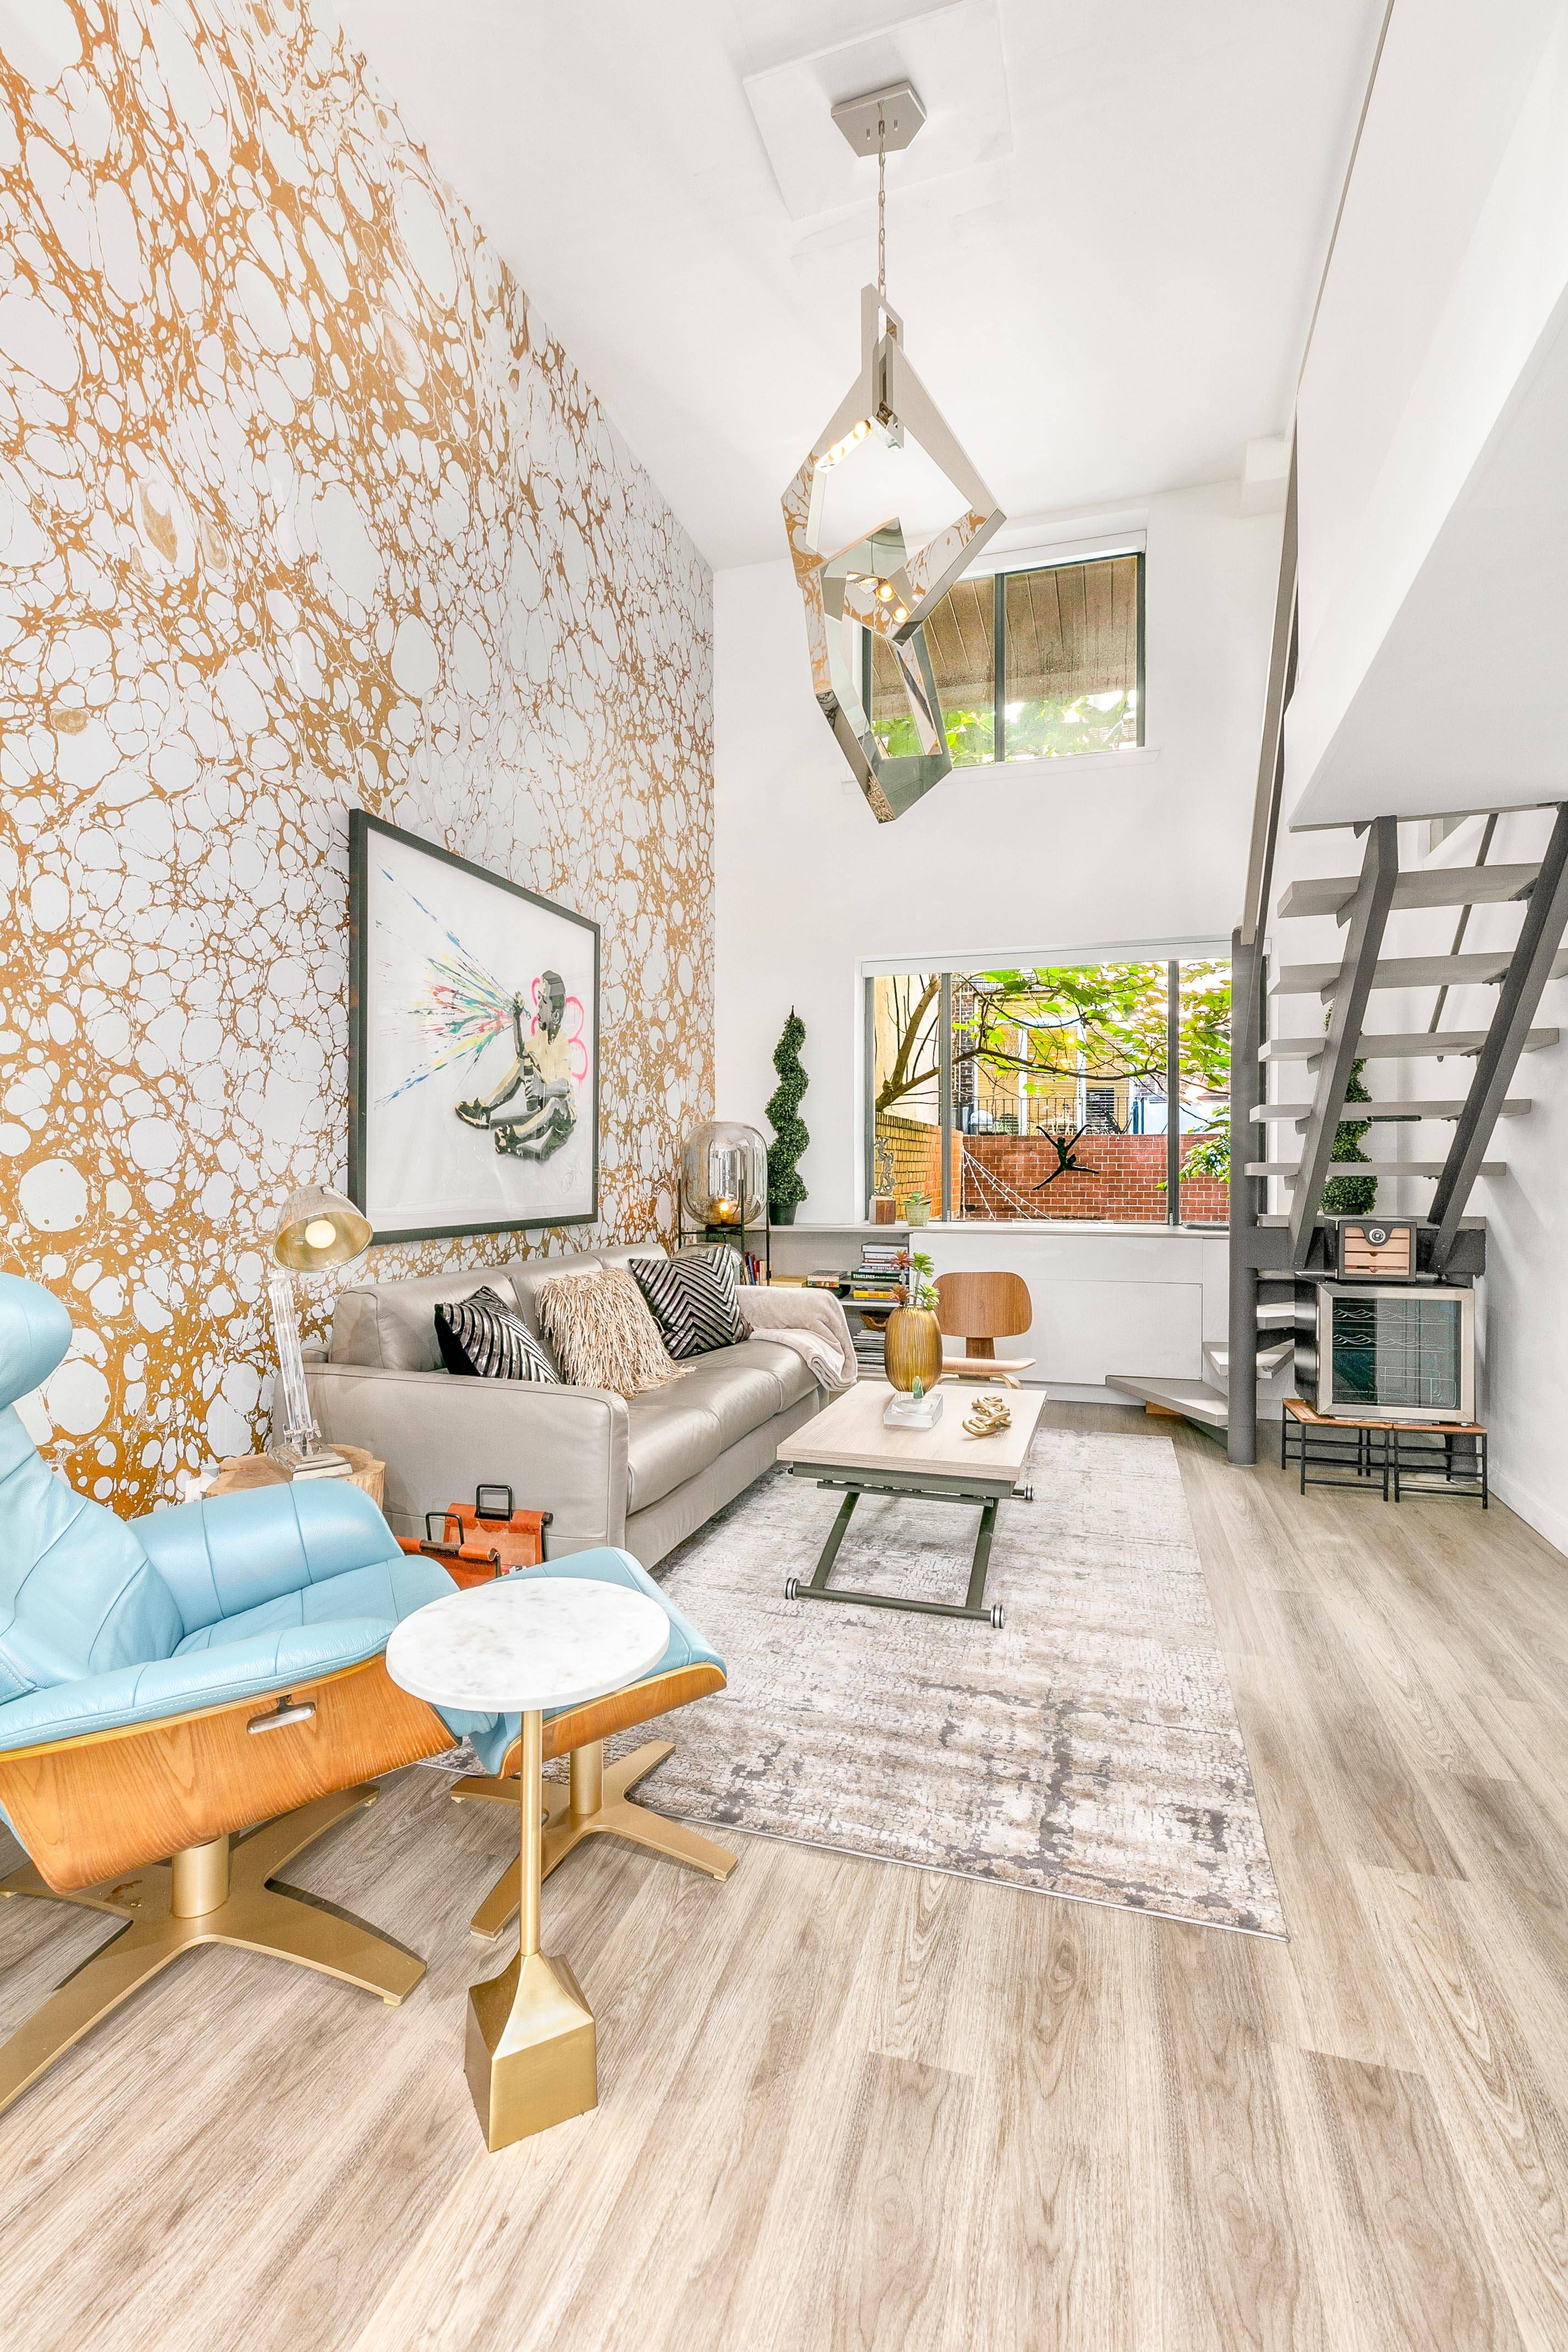 RENOVATED DUPLEX LOFT CONDO ON THE BEST STREET IN NOLITA Apartment 1B is a very special offering at 259 Elizabeth Street.